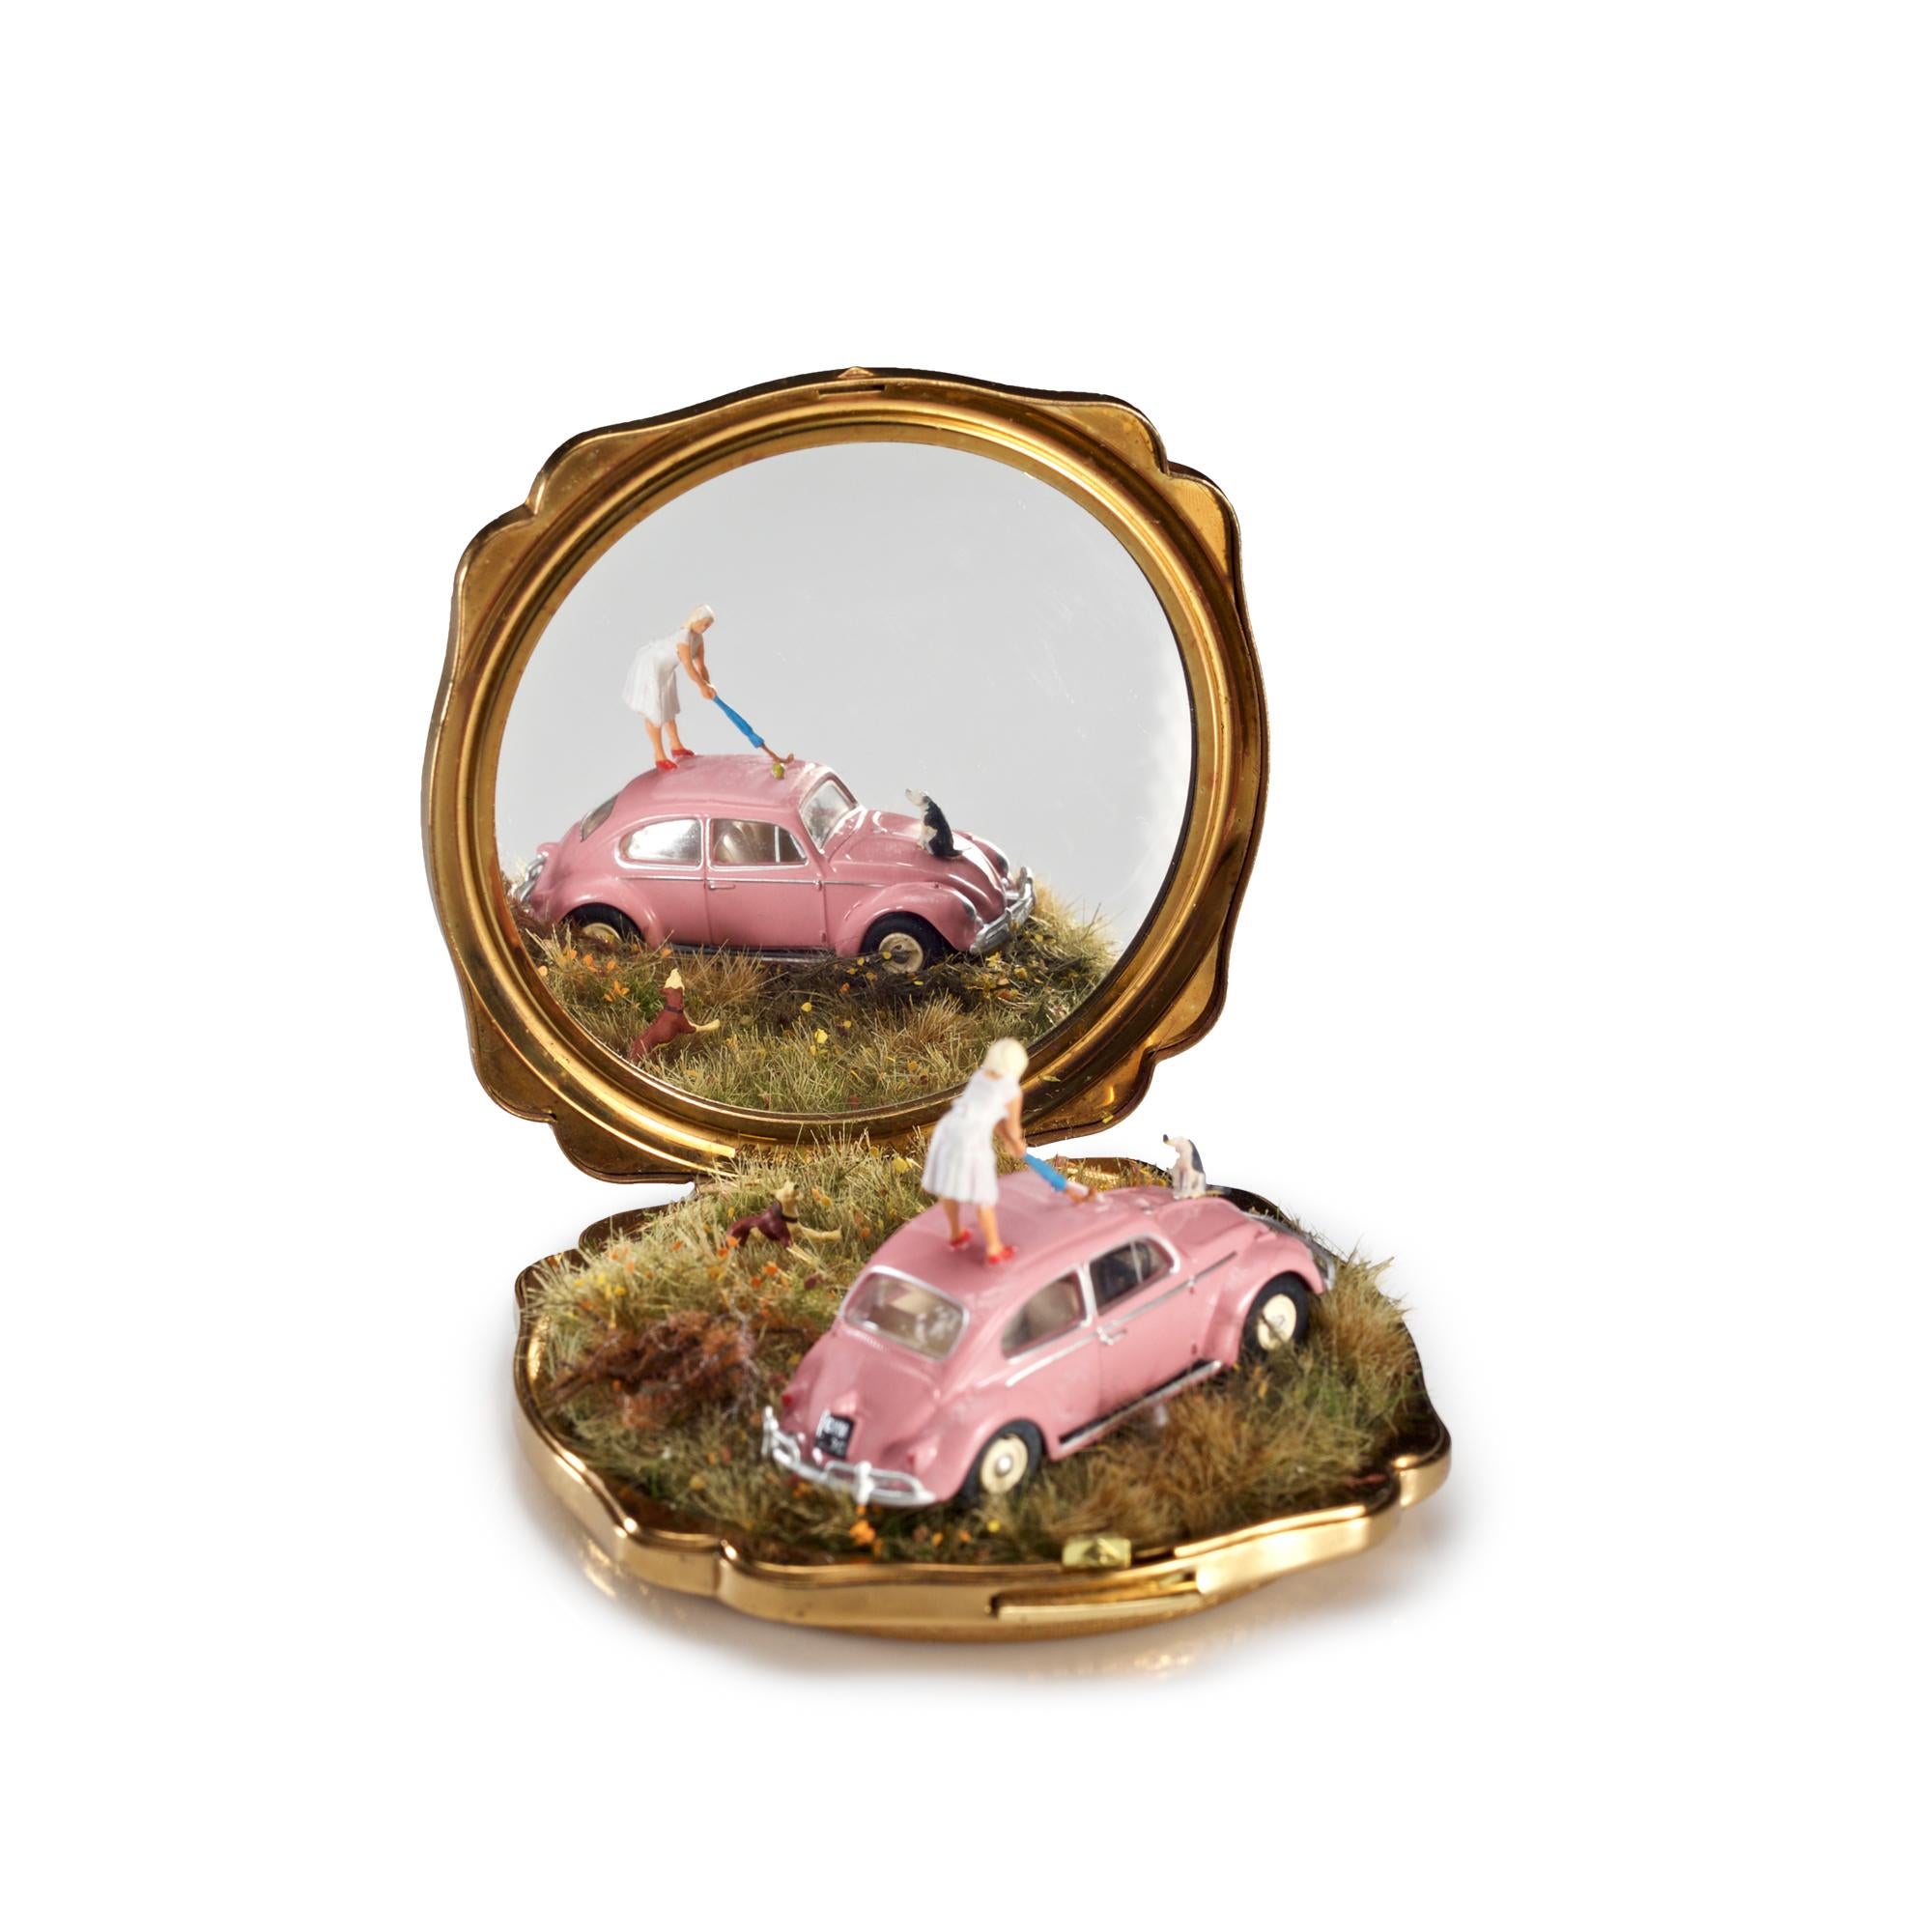 Kendal Murray Still-Life Sculpture - "Tantalize, Synchronize, Exercise!", Miniature compact and mirror landscape